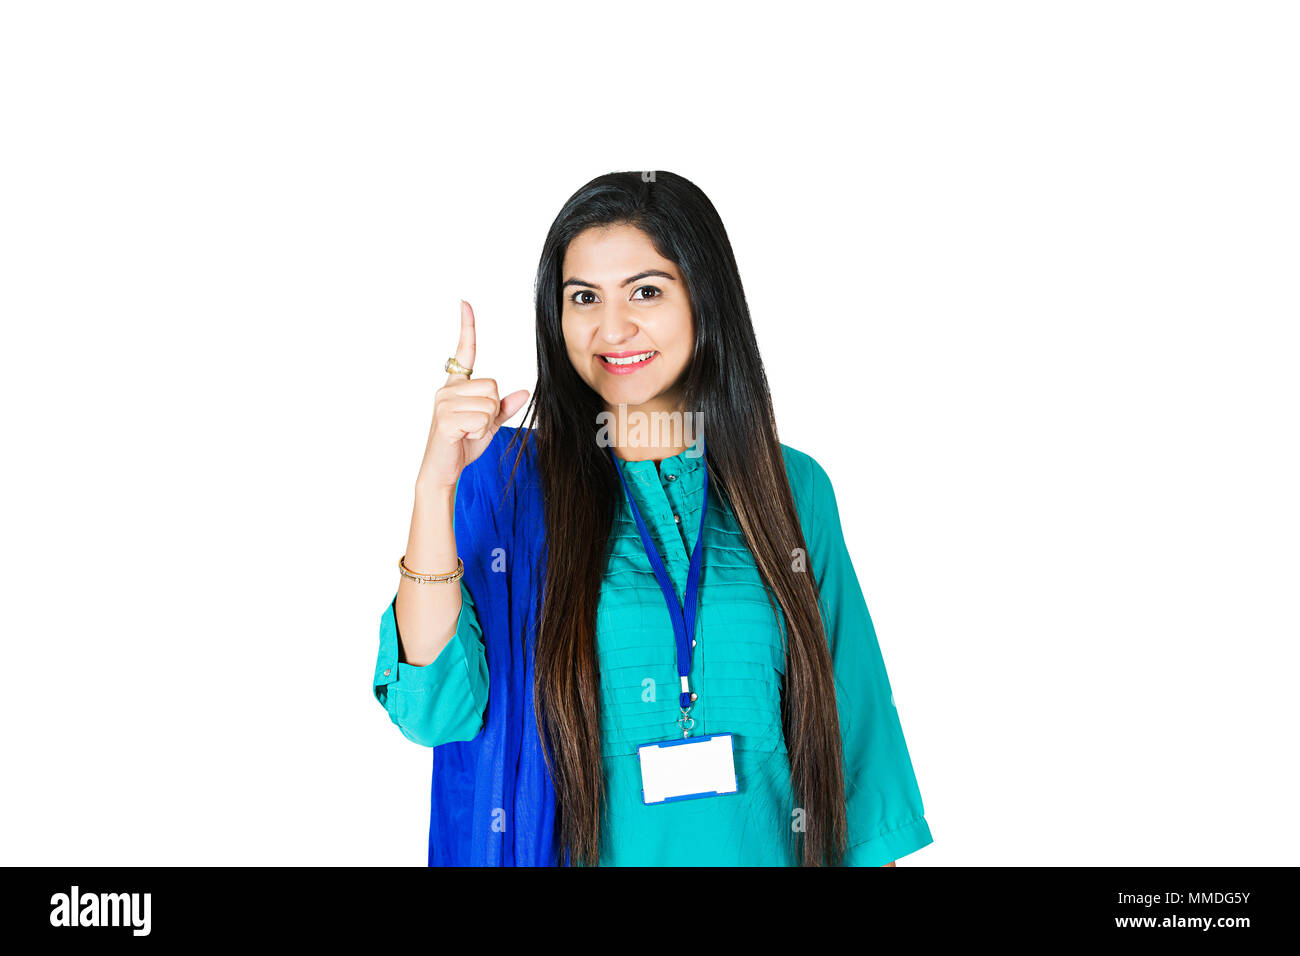 One Business Female Executive showing Index finger Pointing Stock Photo